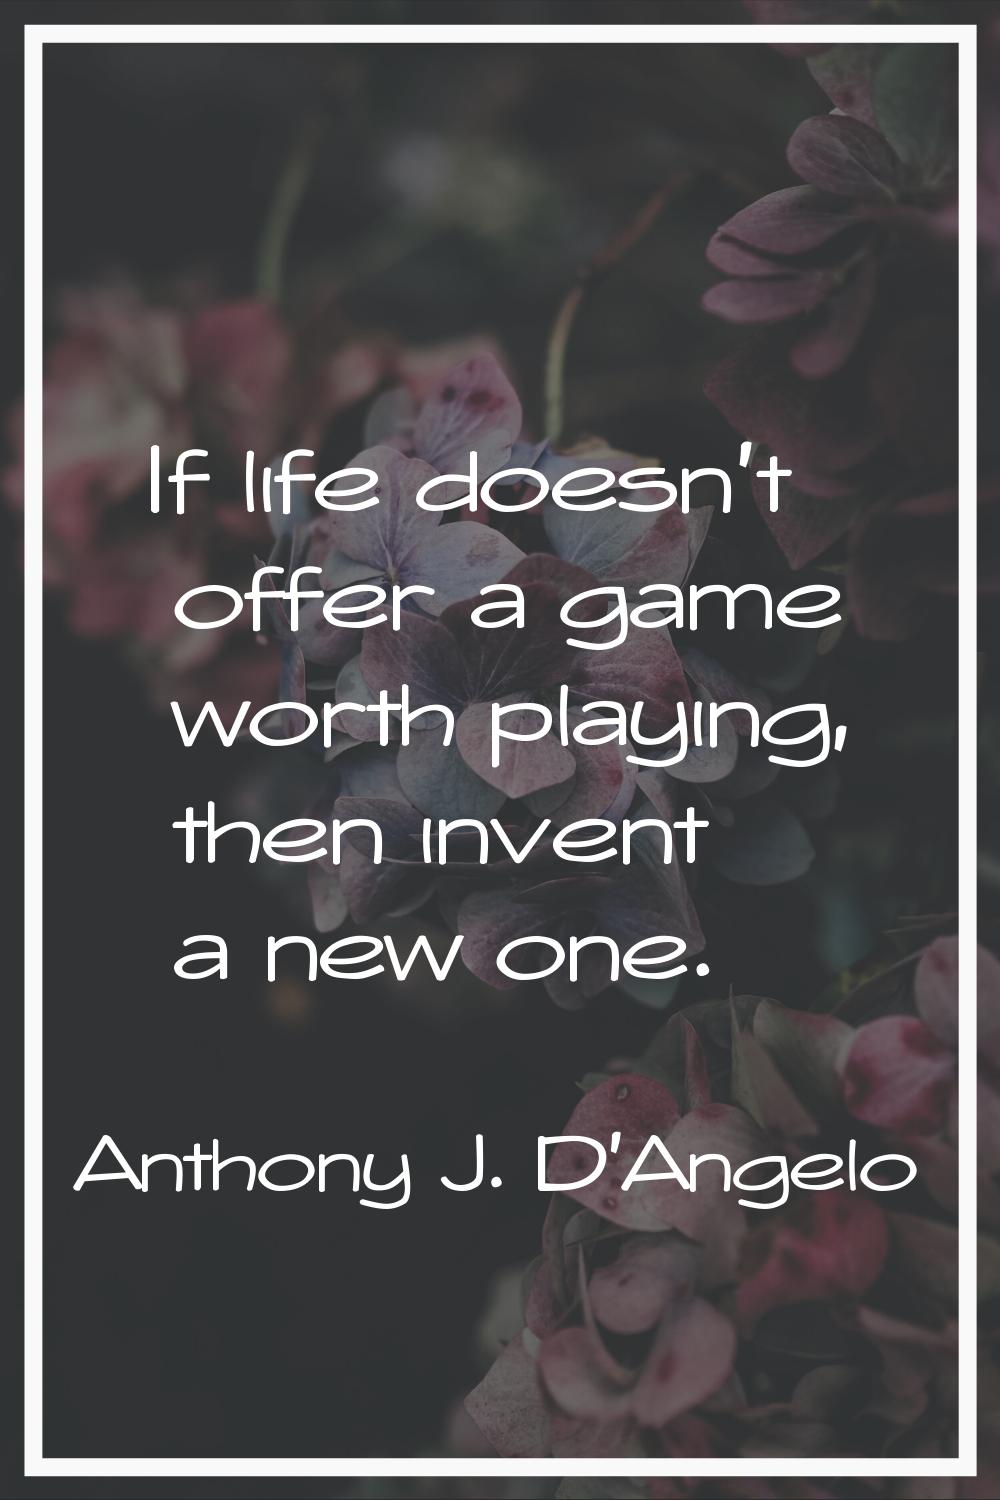 If life doesn't offer a game worth playing, then invent a new one.